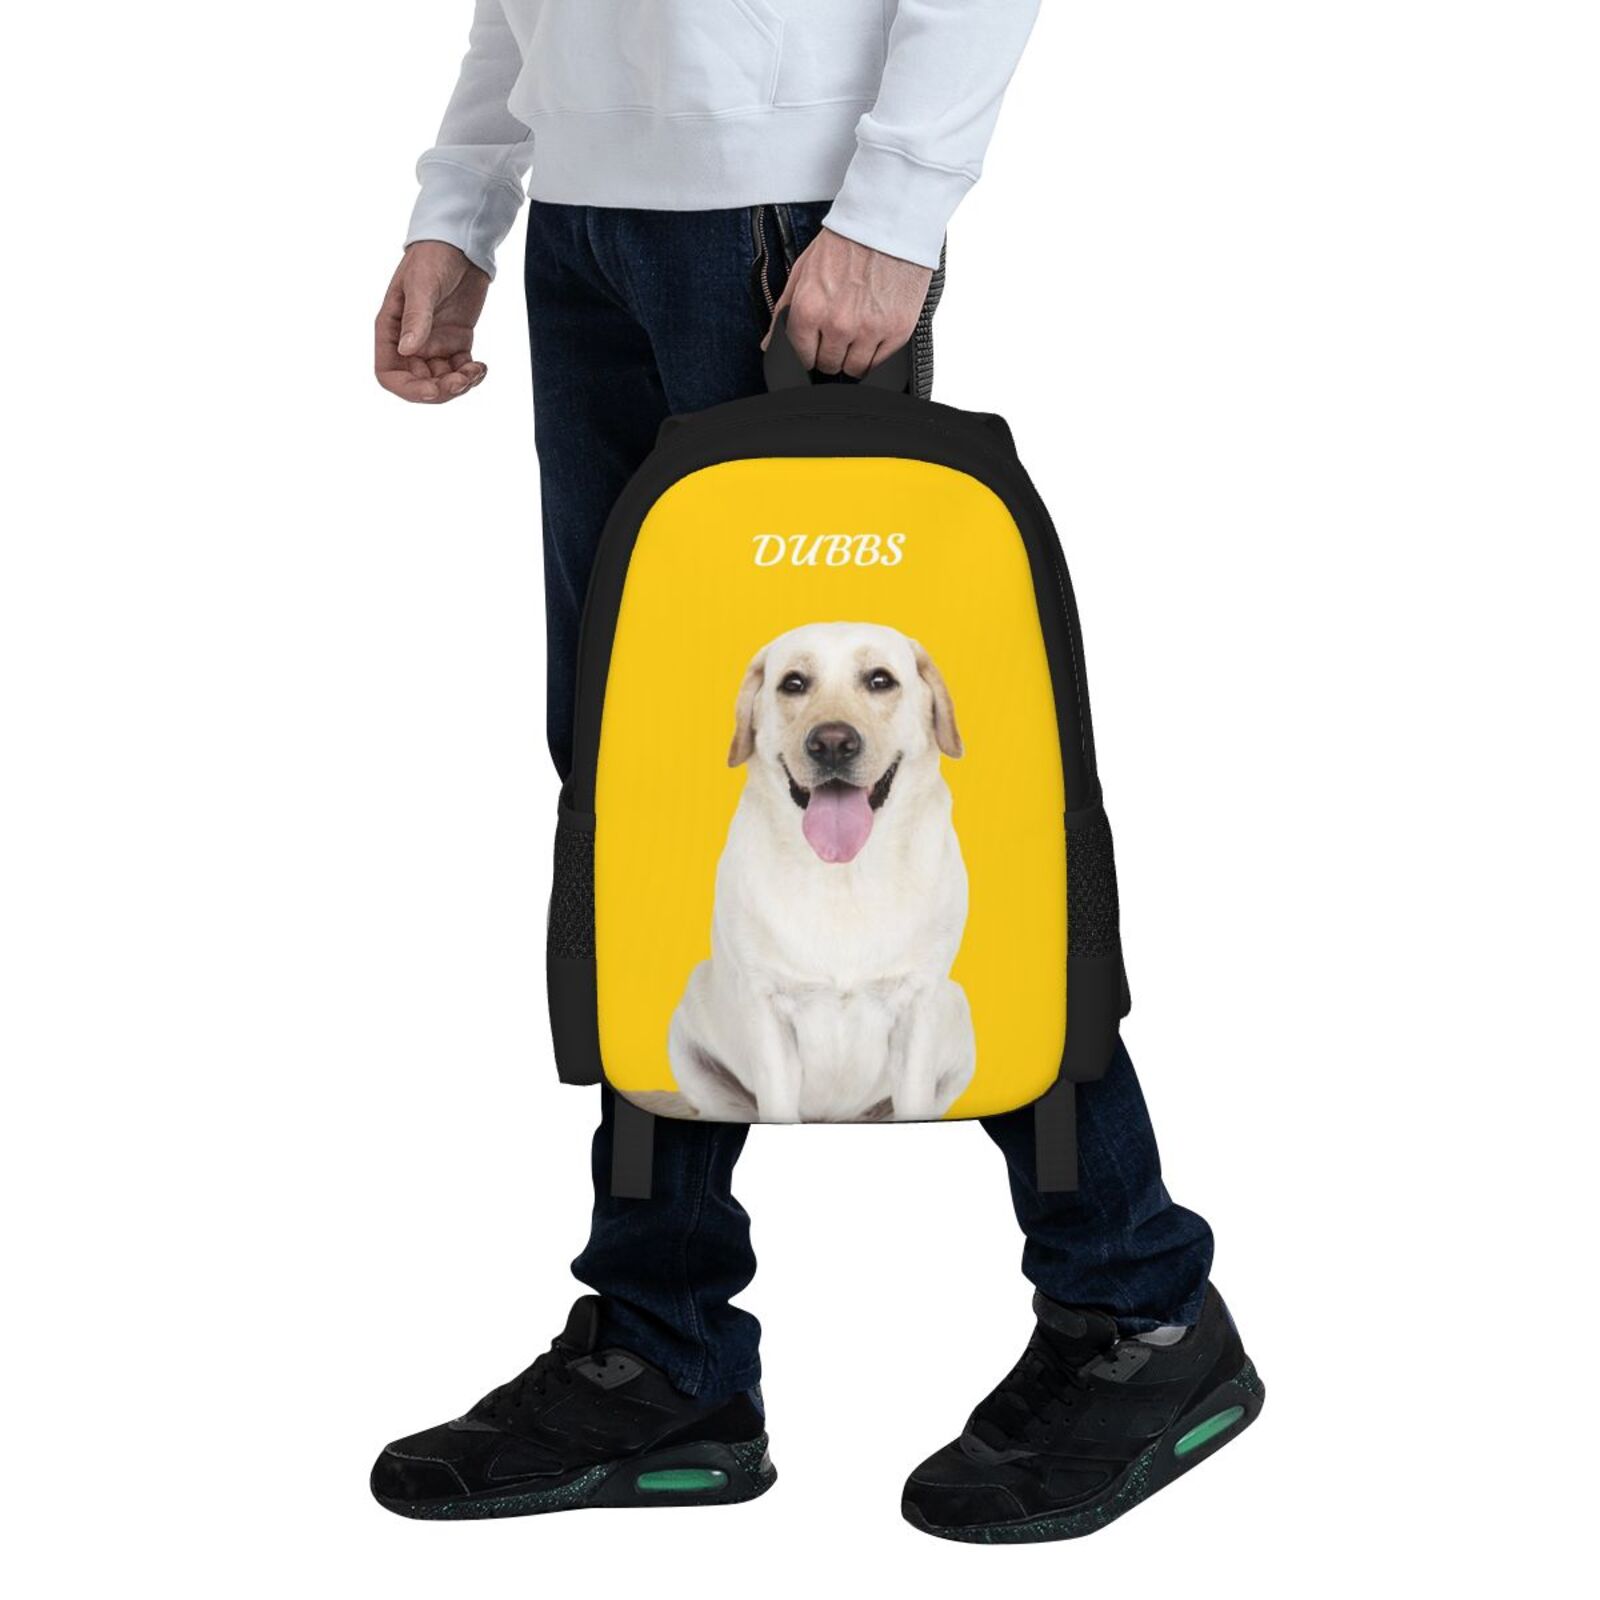 Custom Dog Backpack With Text